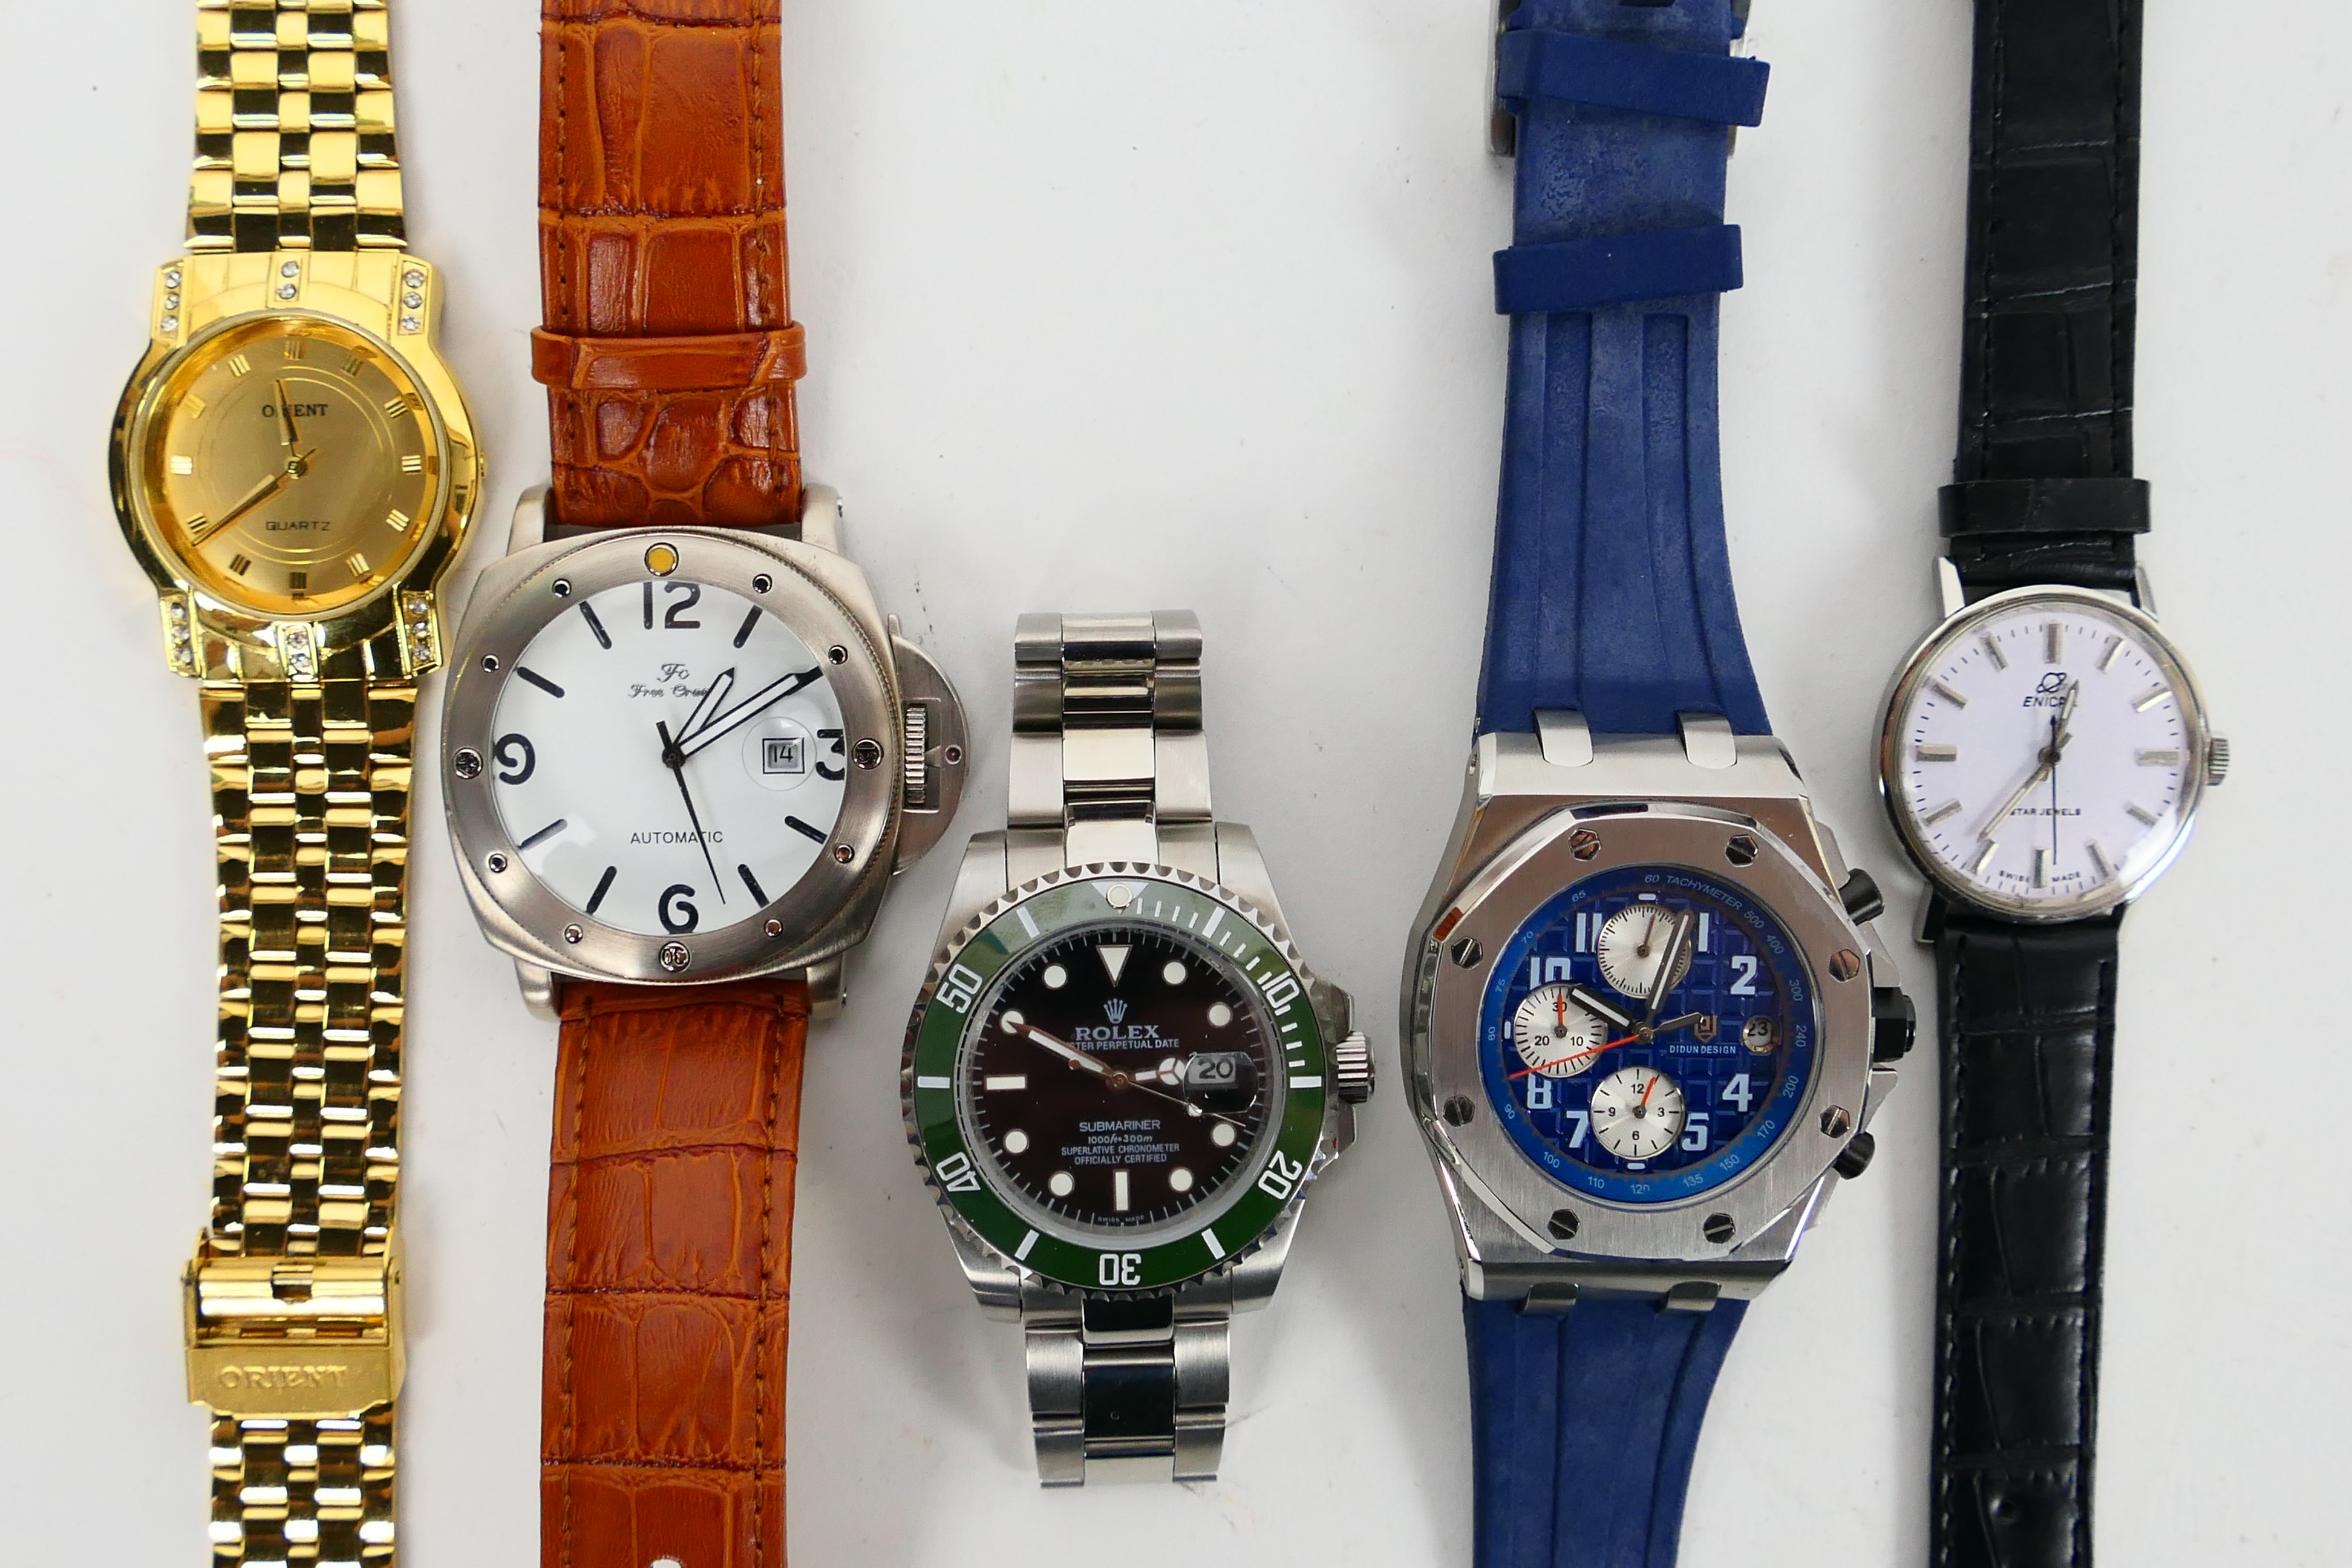 A collection of wrist watches to include Orient, Didun Design, Free Crane and other.